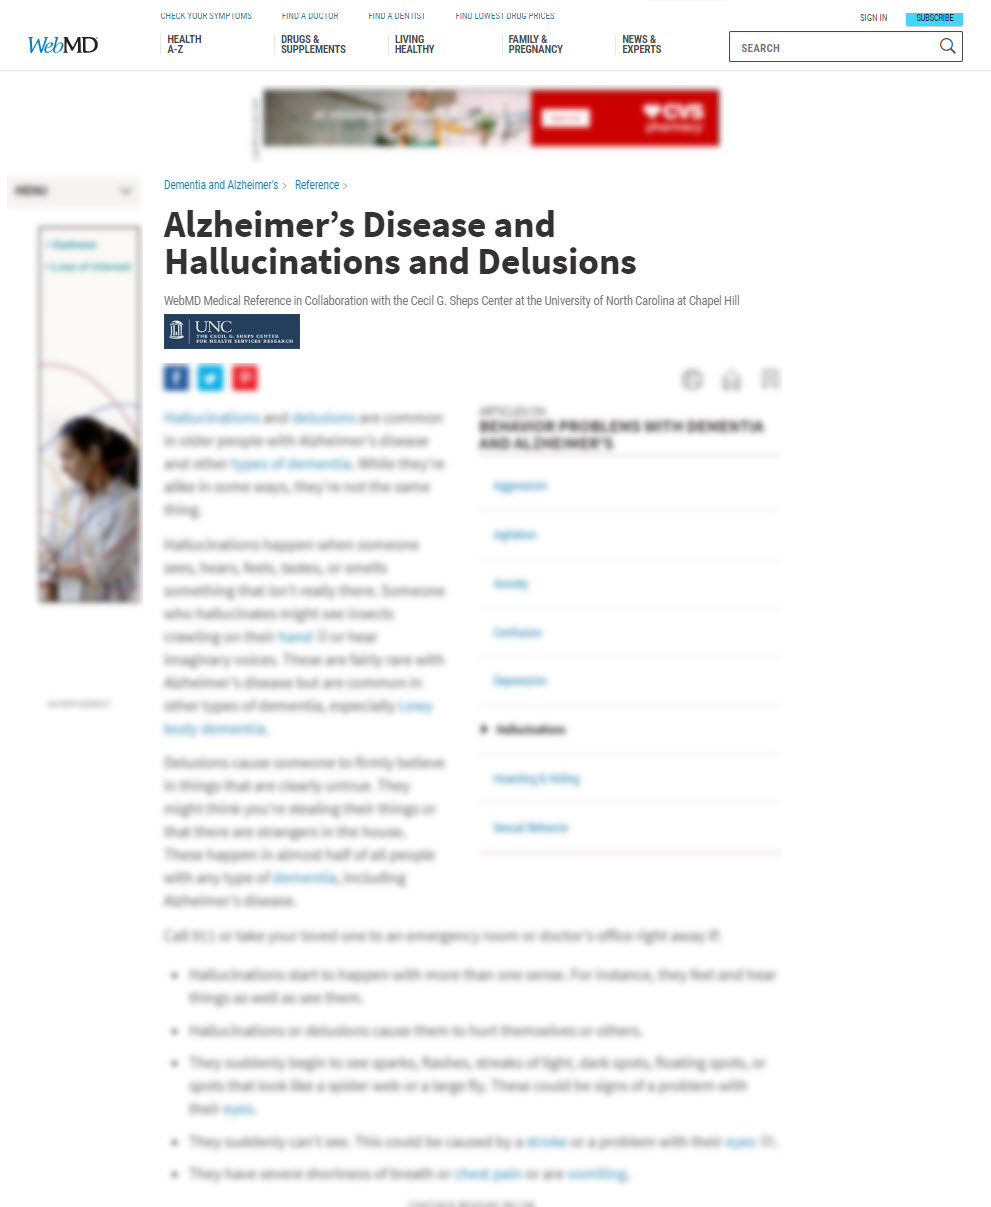 Alzheimer’s Disease and Hallucinations and Delusions